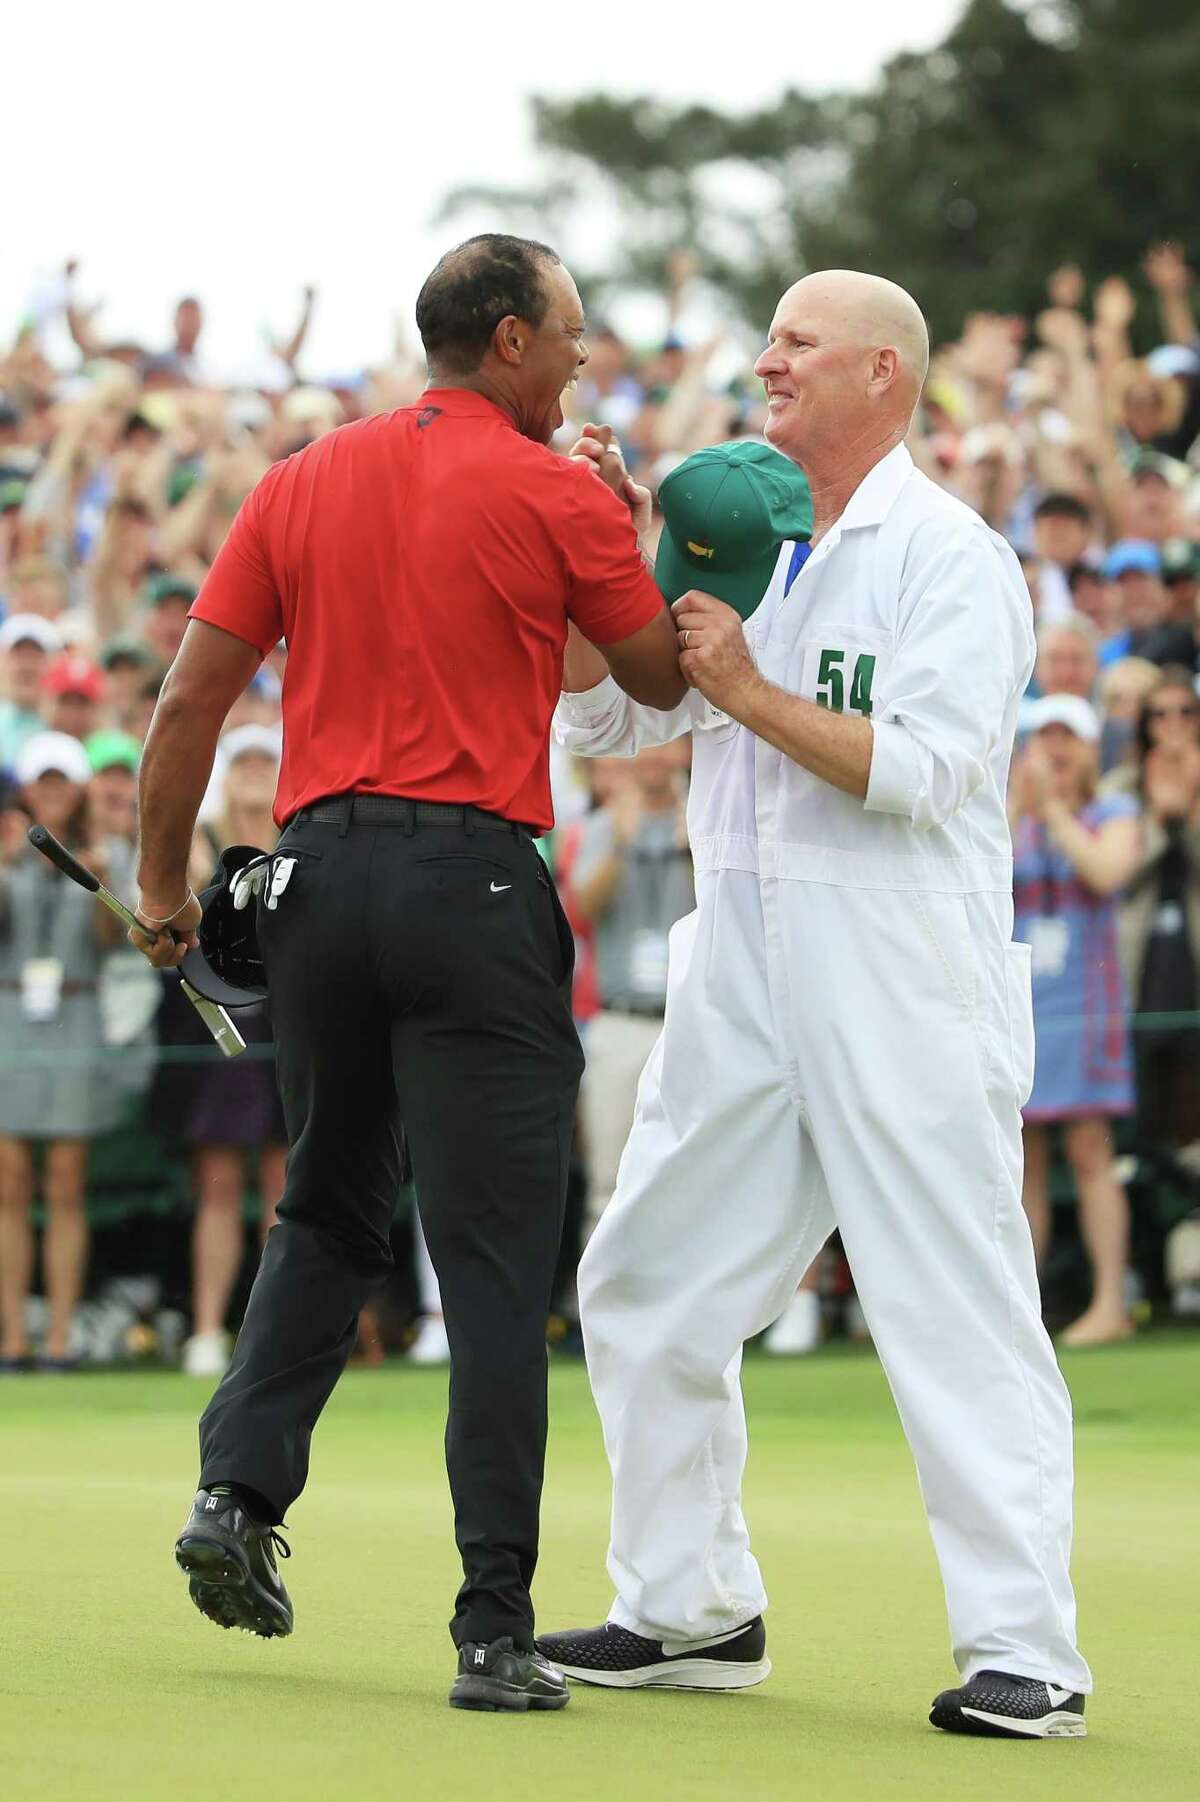 AUGUSTA, GEORGIA - APRIL 14: Tiger Woods (L) of the United States celebrates with caddie Joe LaCava (R) on the 18th green after winning during the final round of the Masters at Augusta National Golf Club on April 14, 2019 in Augusta, Georgia. (Photo by Andrew Redington/Getty Images)